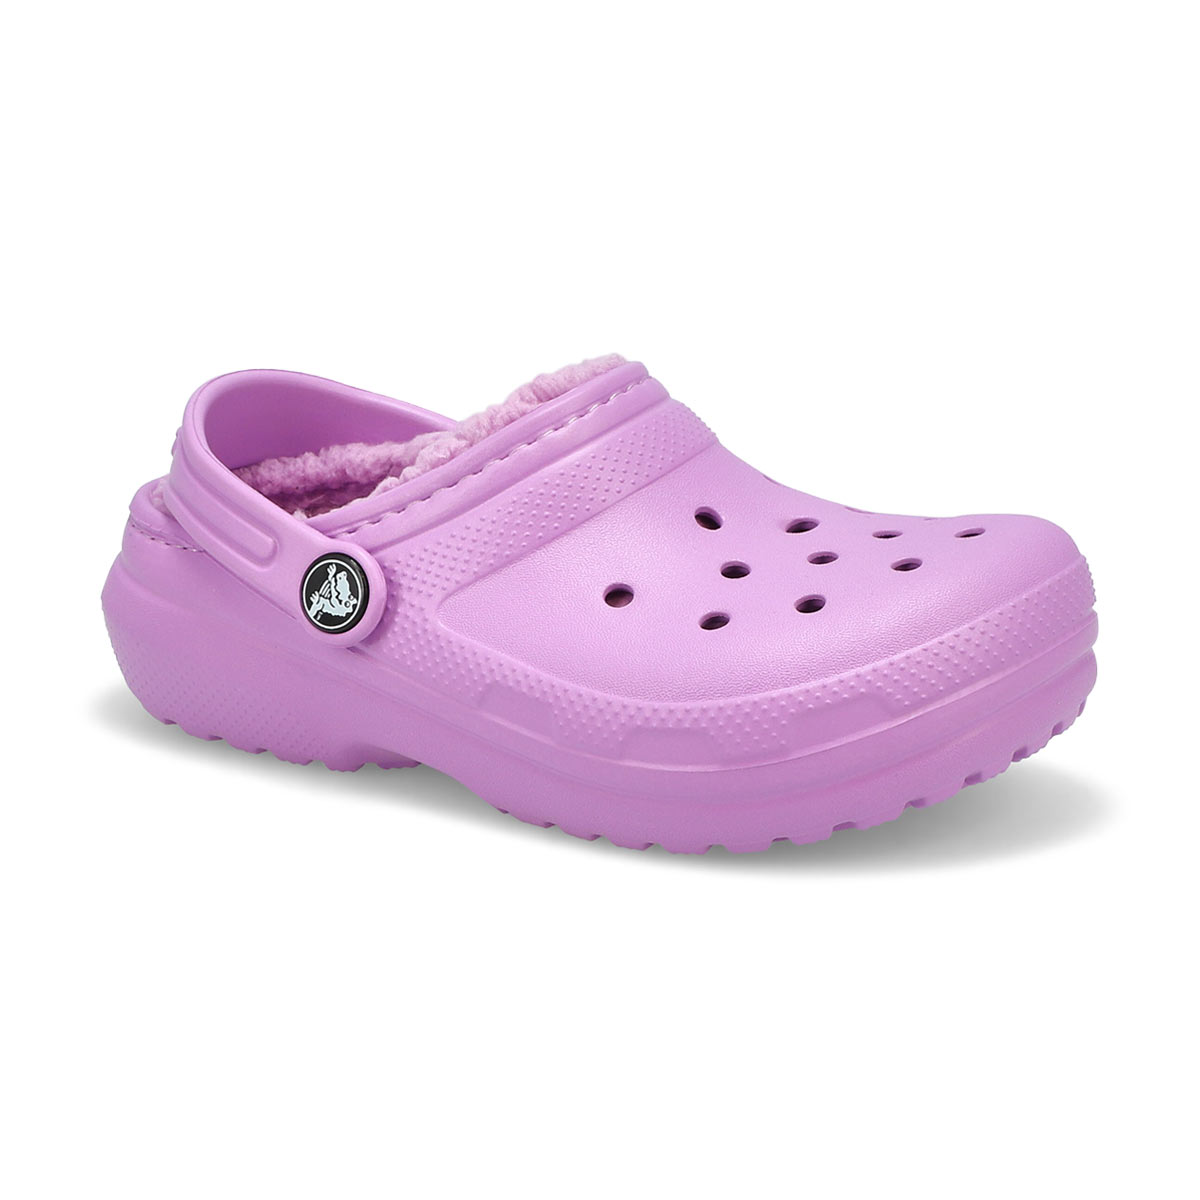 Kids' Classic Lined Clog - Orchid